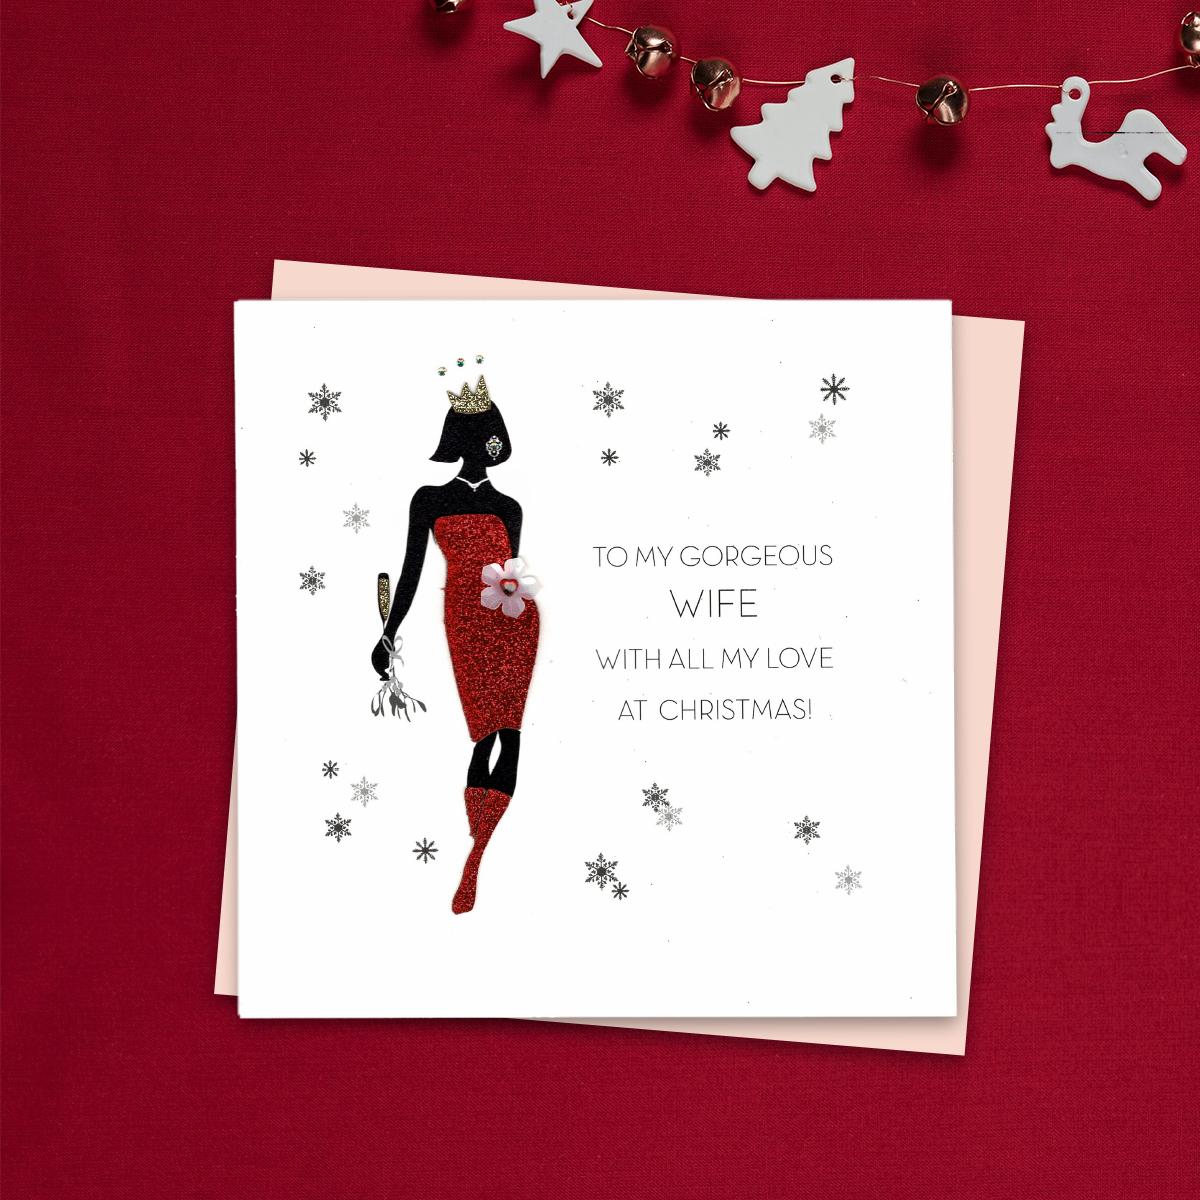 To My Gorgeous Wife With All My Love At Christmas Featuring A Lady Dressed In Red Sparkly Dress And Boots And Gold Party Hat! Finished With Decoupage, Gold Glitter Detail  And Jewel Embellishments, This Handcrafted Card Is Stunning. Blank Inside For Your Own Message. Blush Coloured Envelope